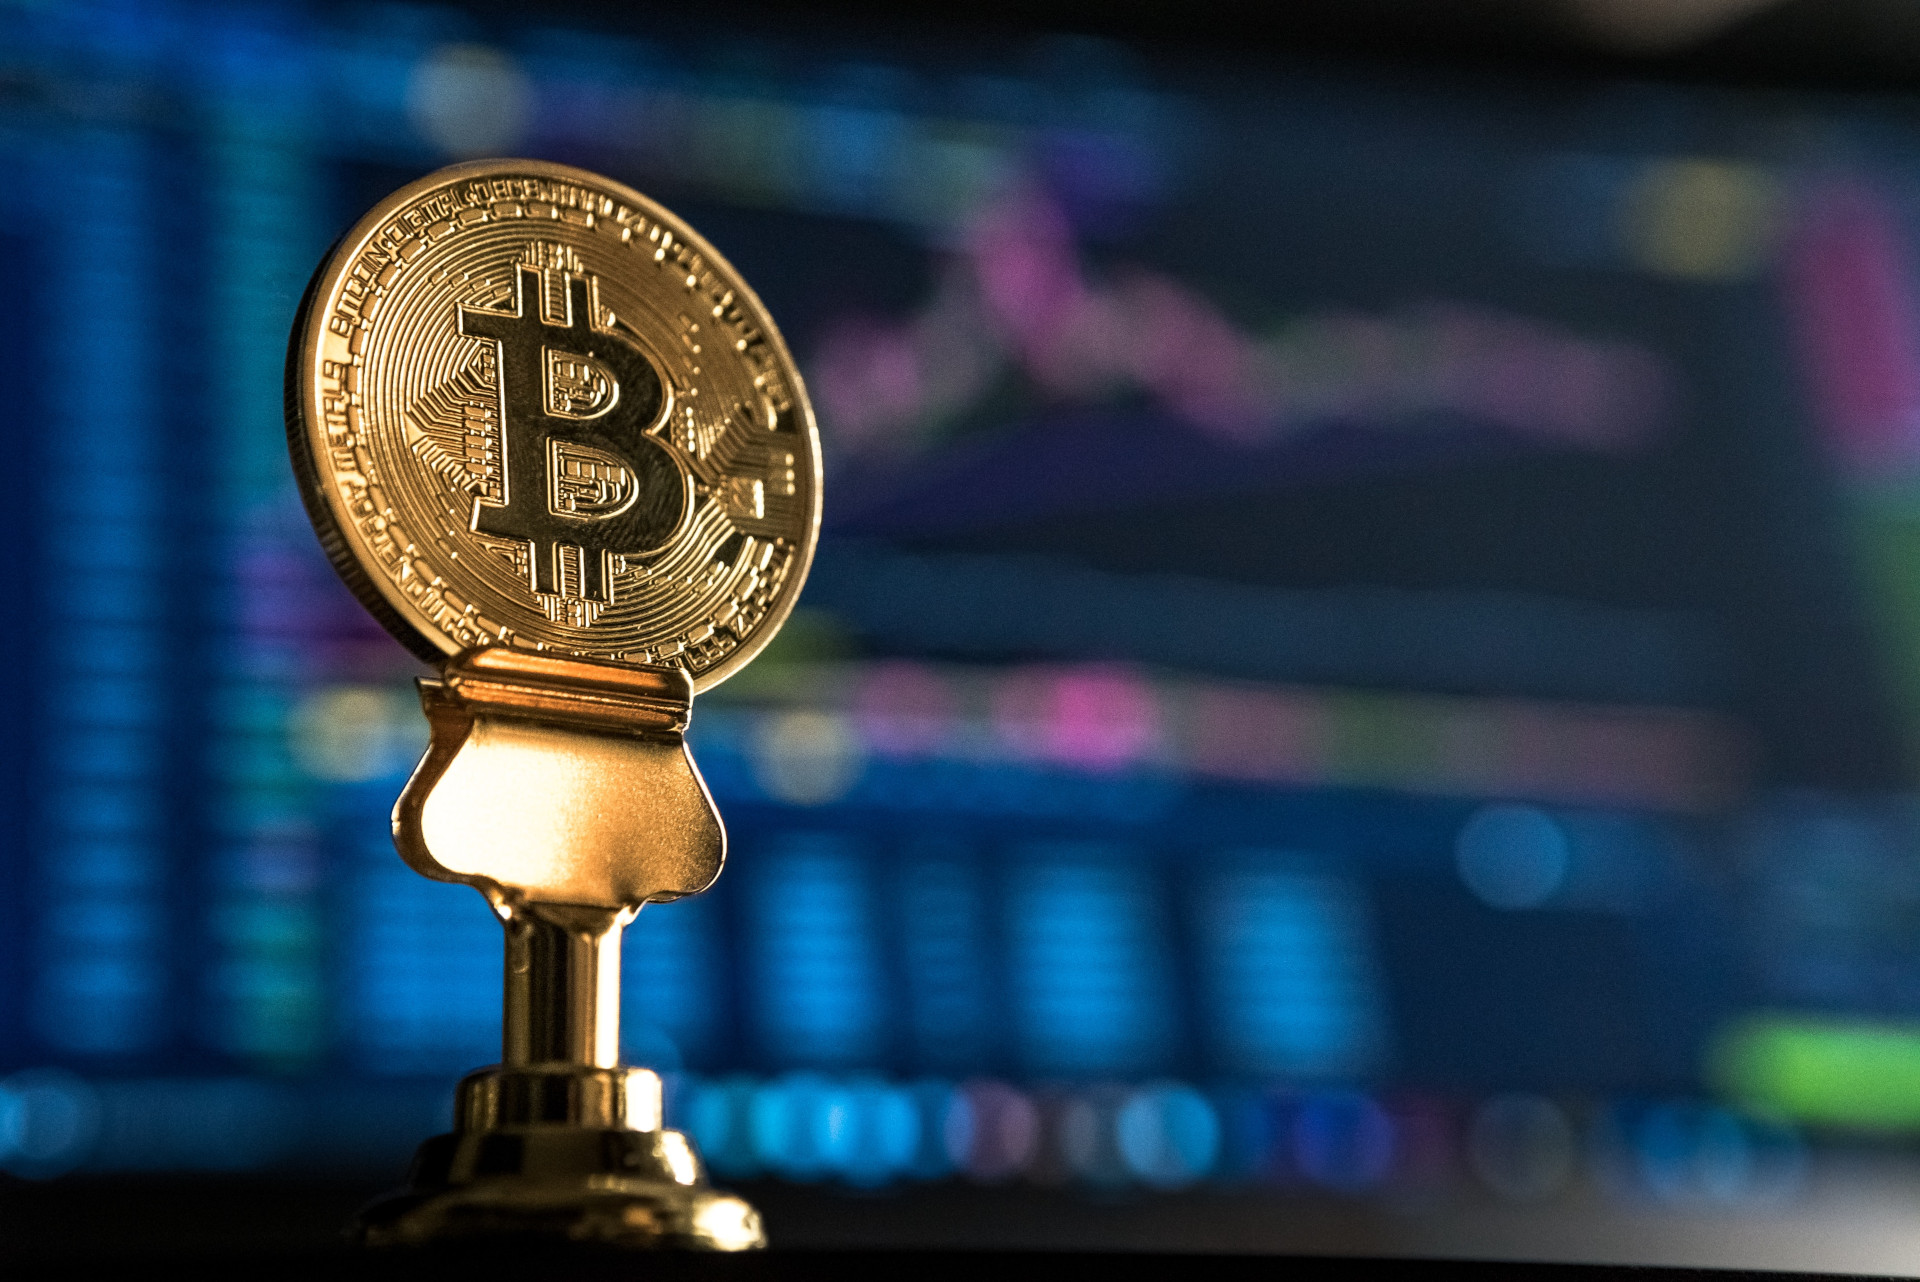 Should you invest in bitcoin or other cryptocurrencies?